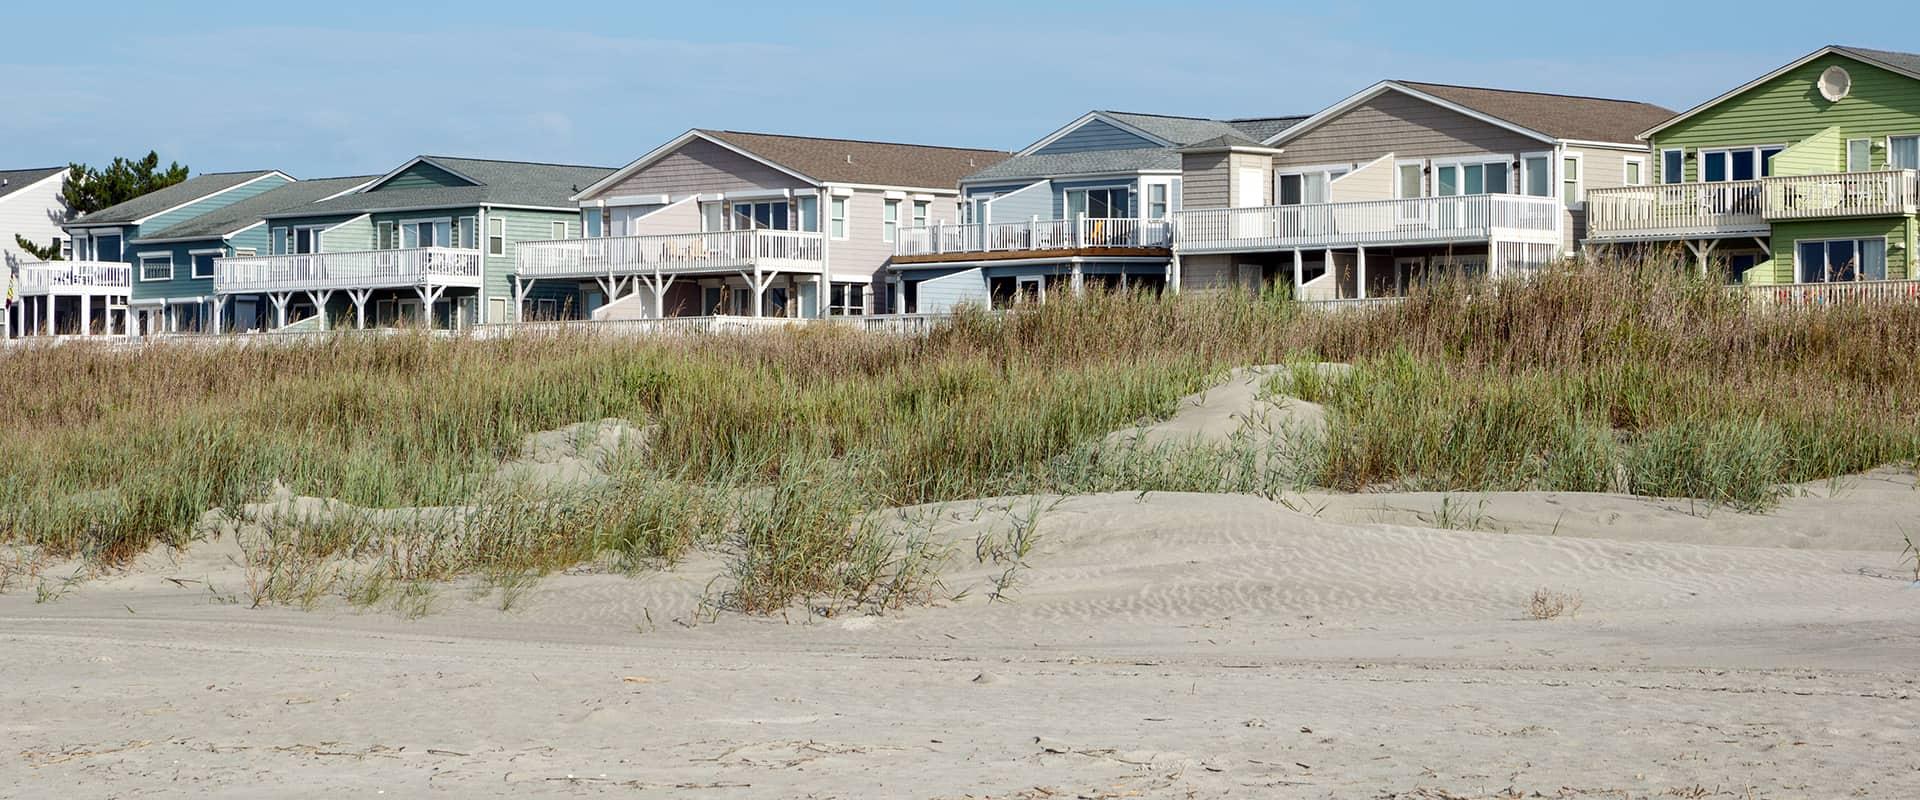 beach view of a row of homes